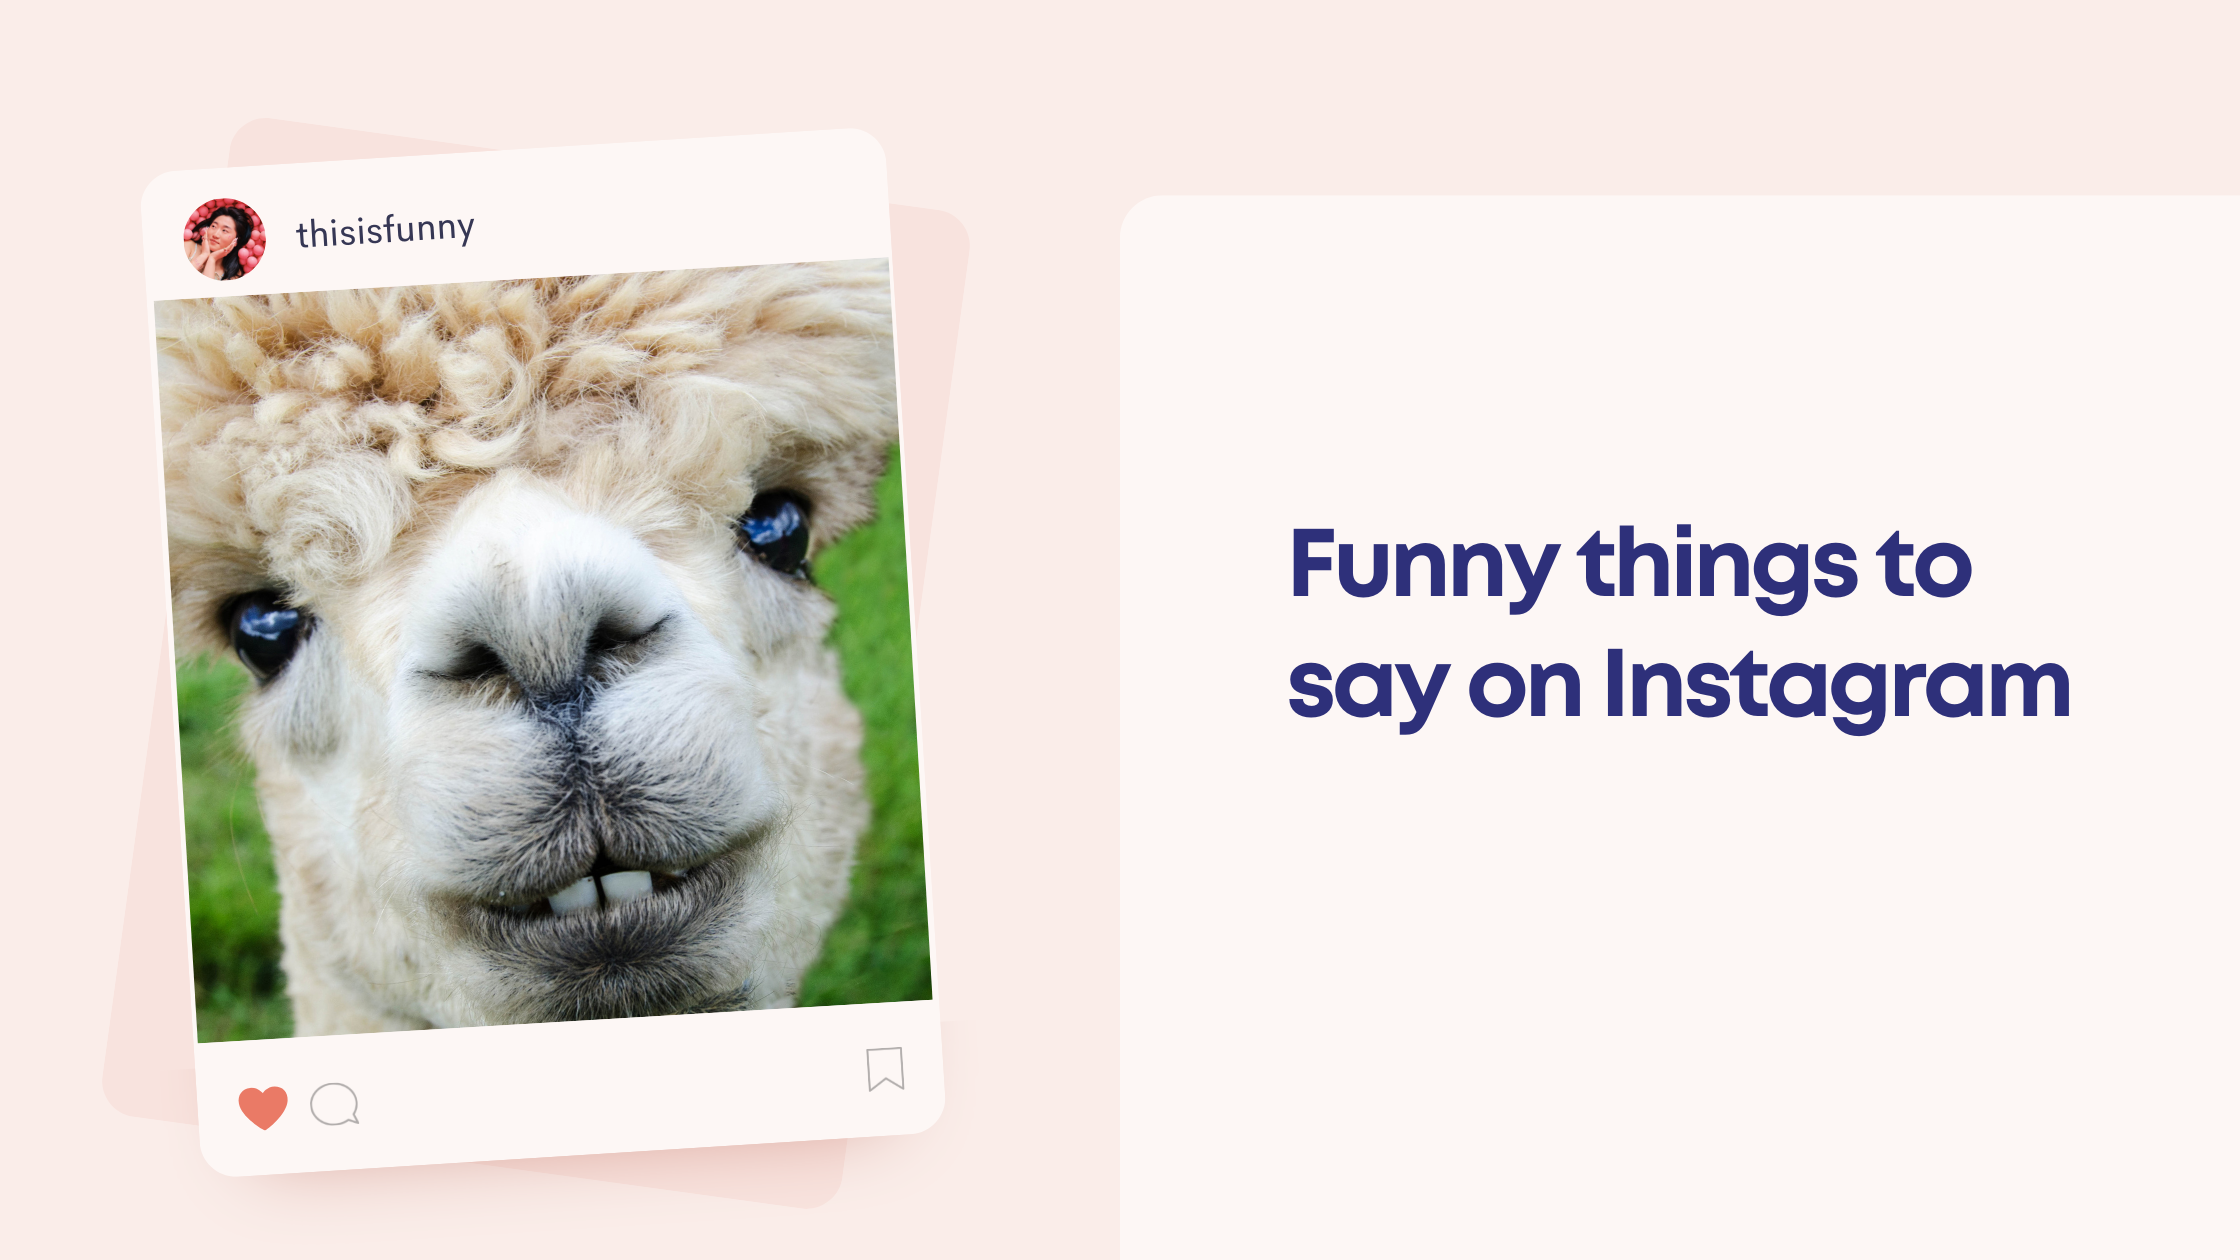 Remote.tools shares a list of funny things to say on Instagram